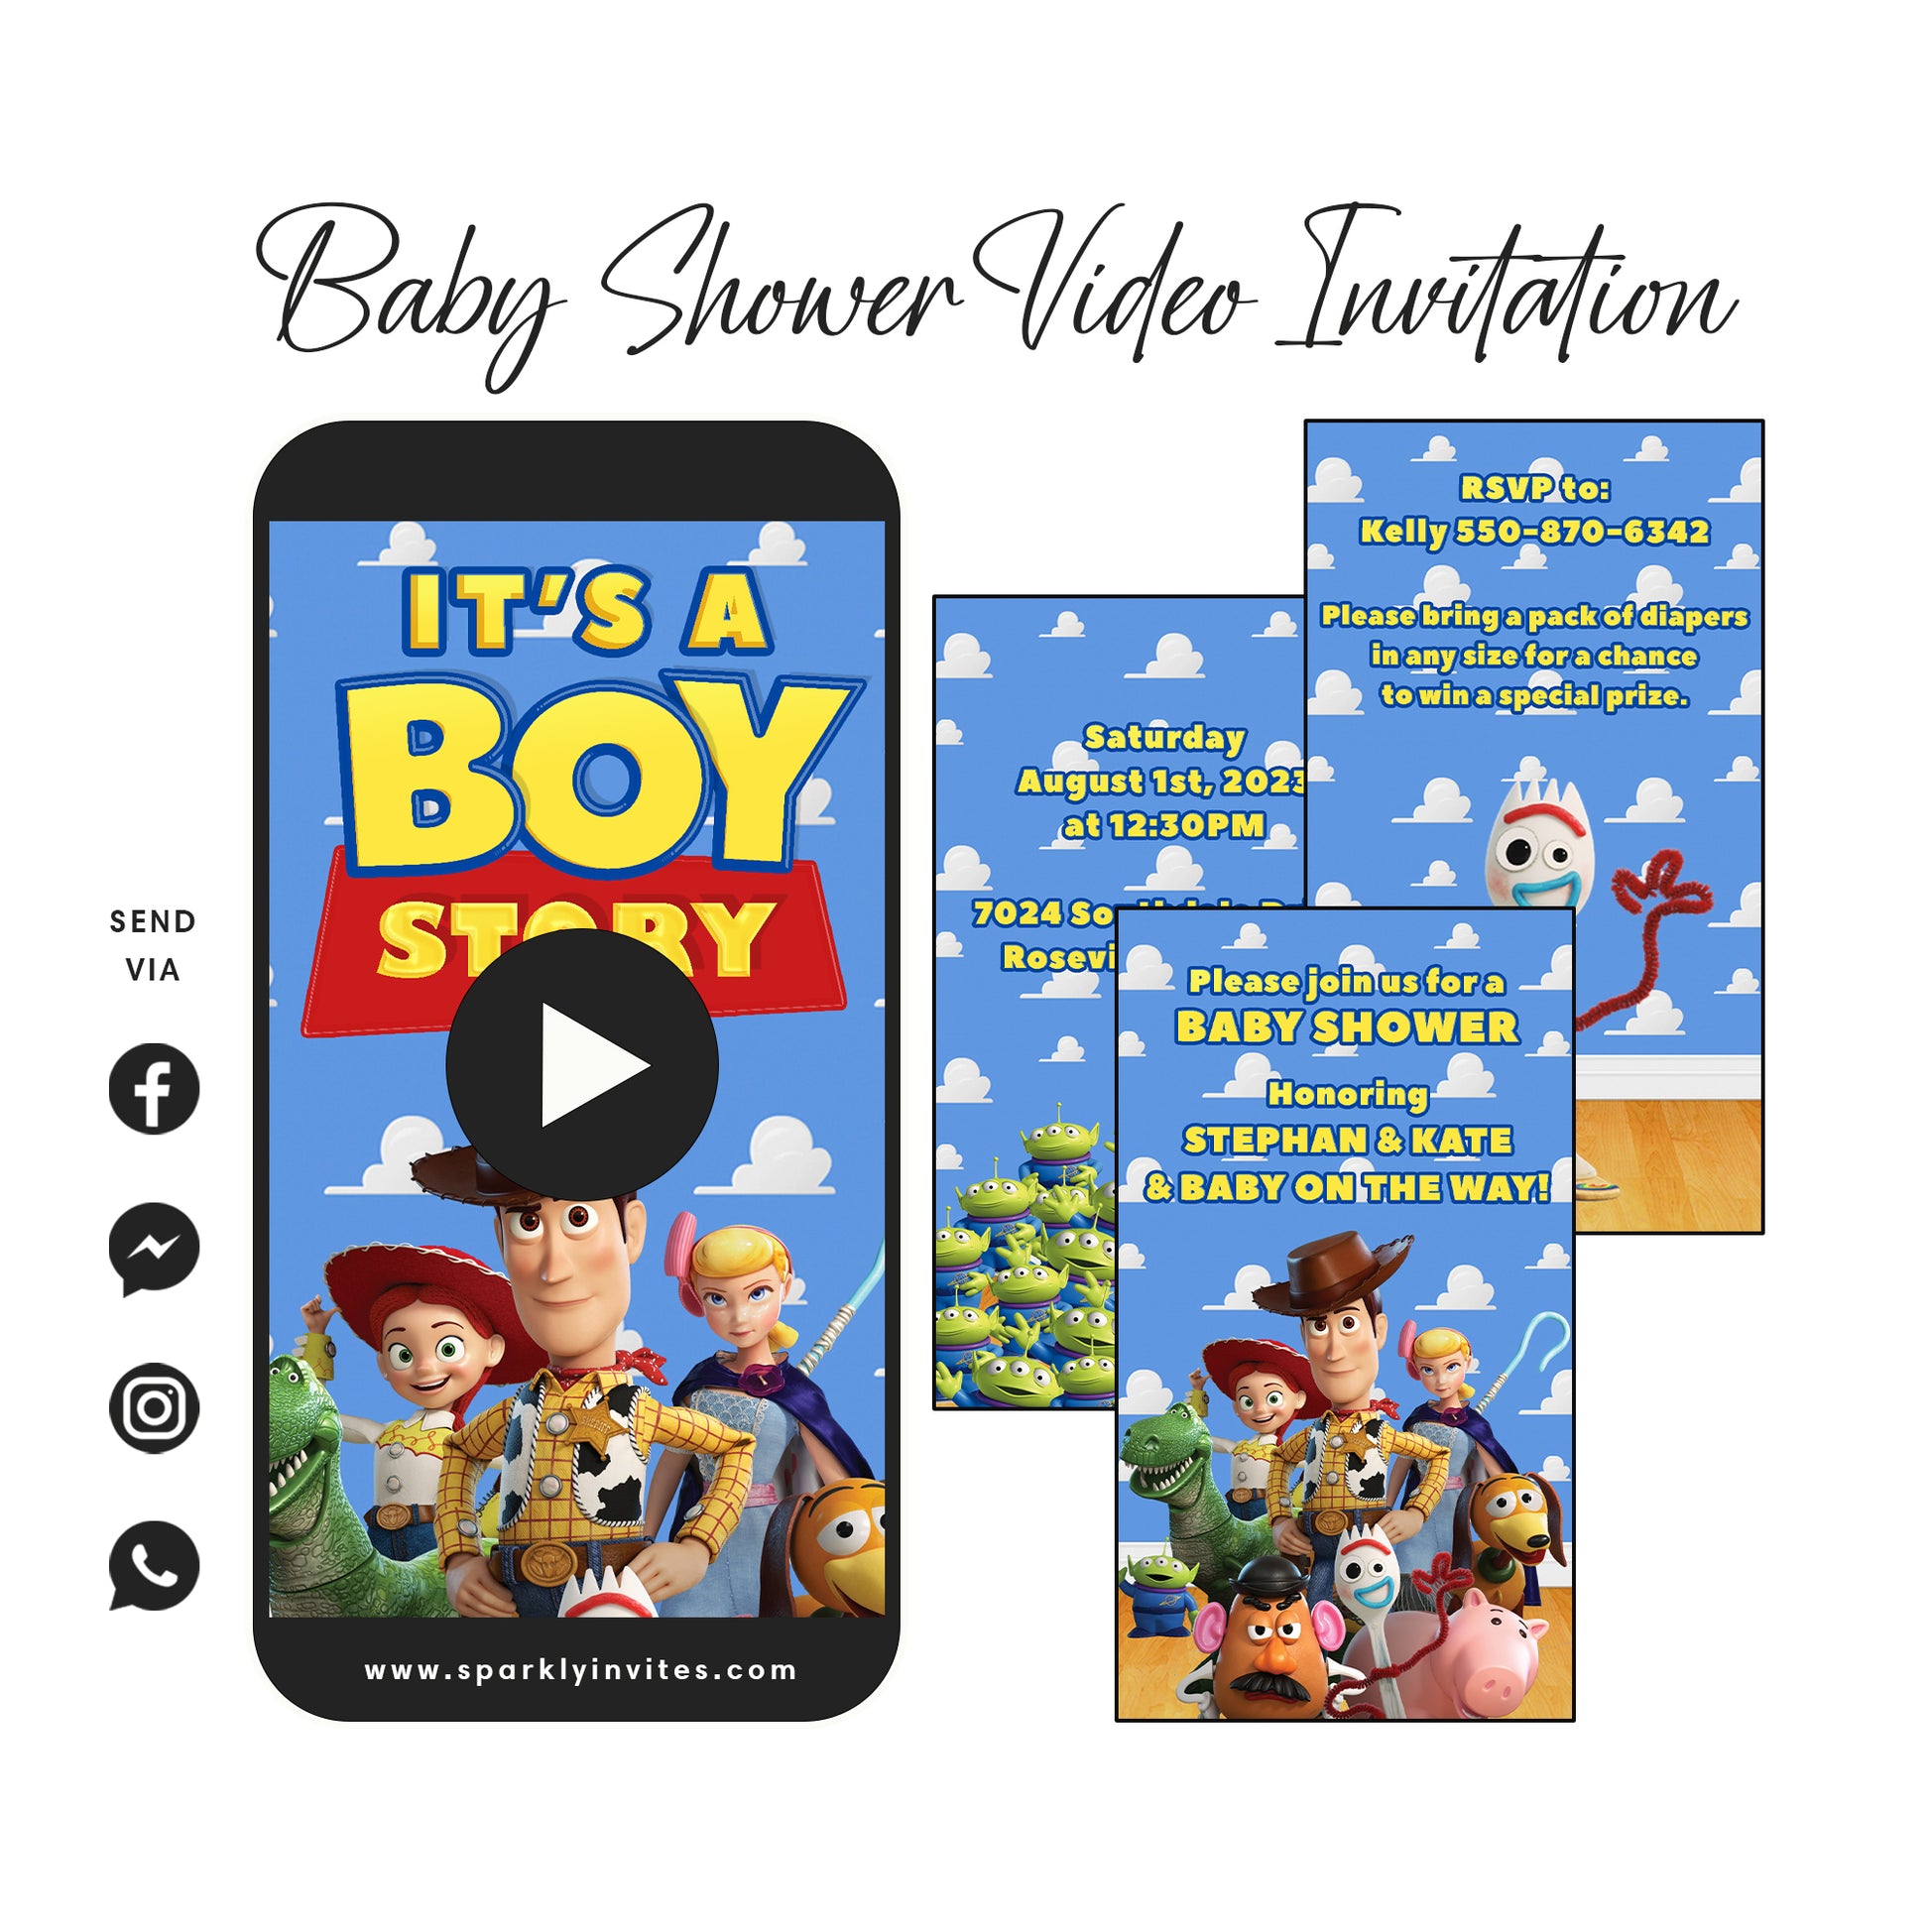 Toy Story Baby Shower video invitation it's a boy